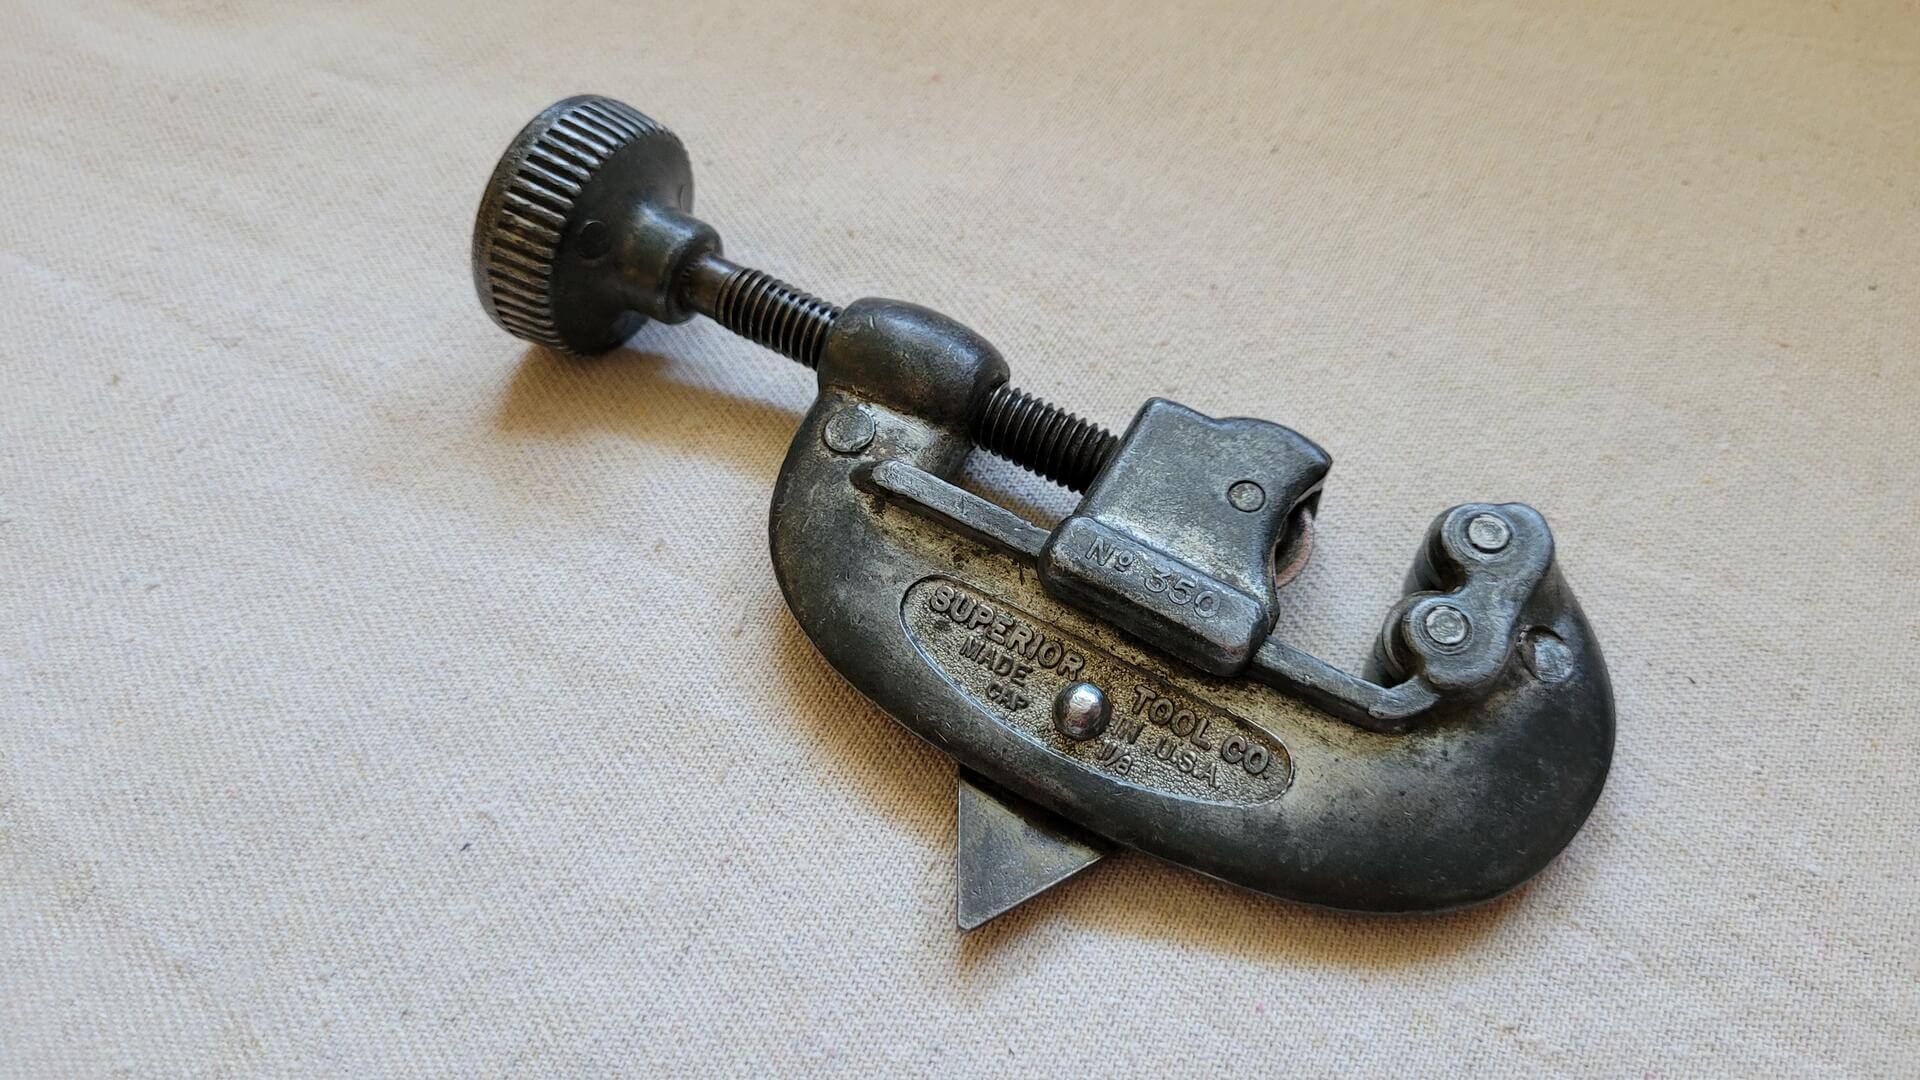 Vintage Superior Tool Co No. 350 Screw-Feed Tubing Cutter - Antique made in USA collectible plumbing tools